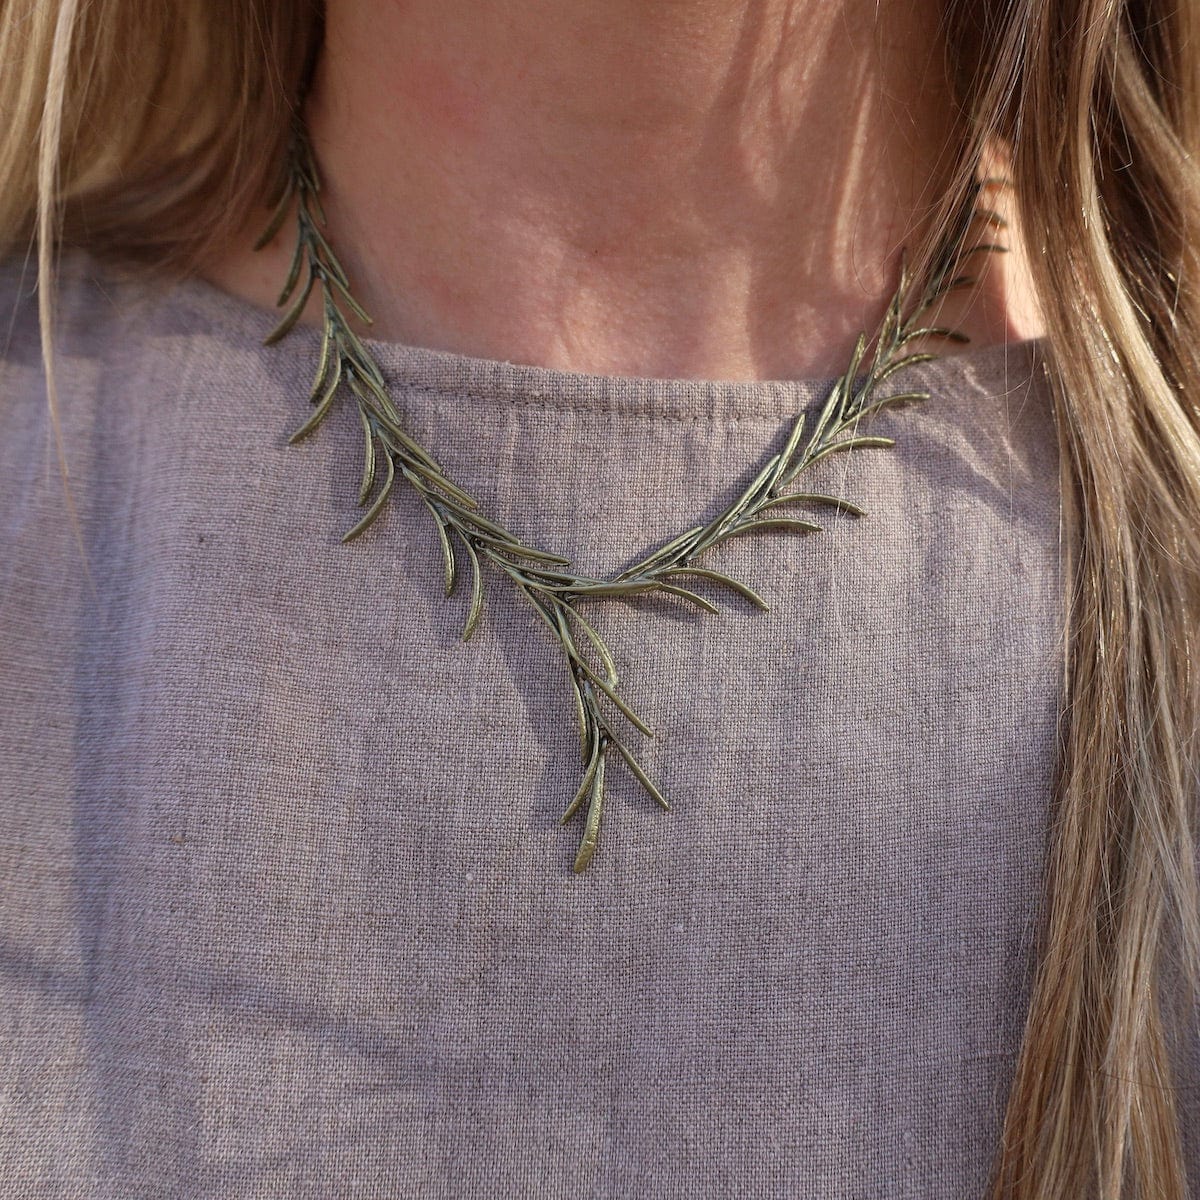 NKL Rosemary Necklace